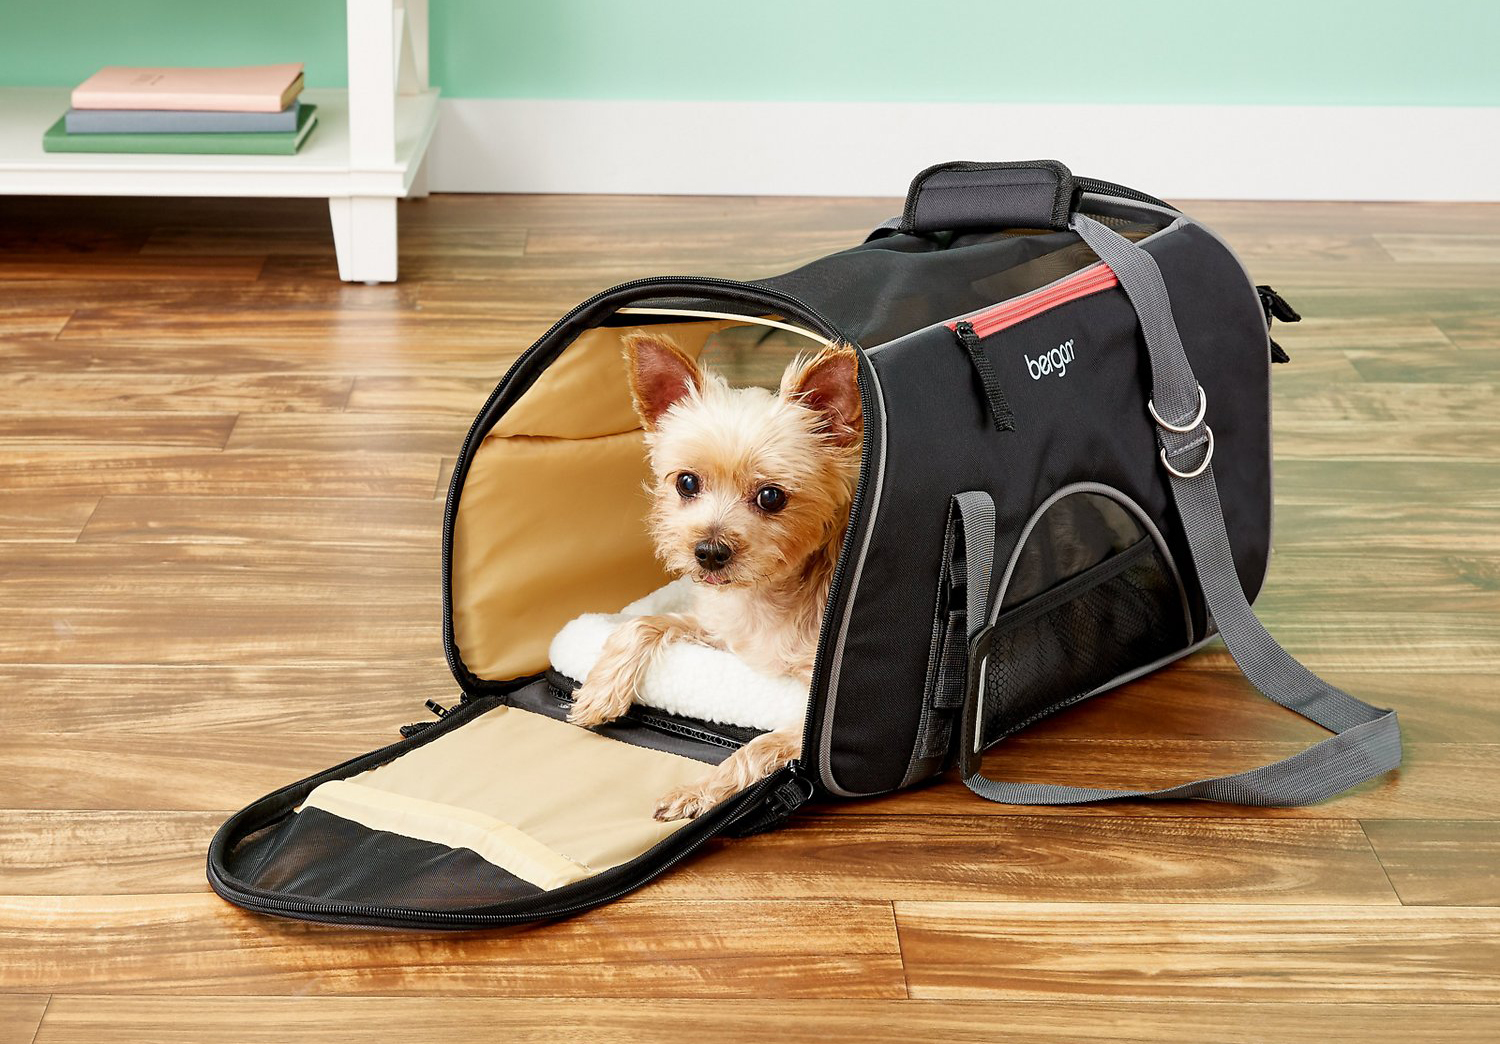 united airlines pet travel carrier dimensions